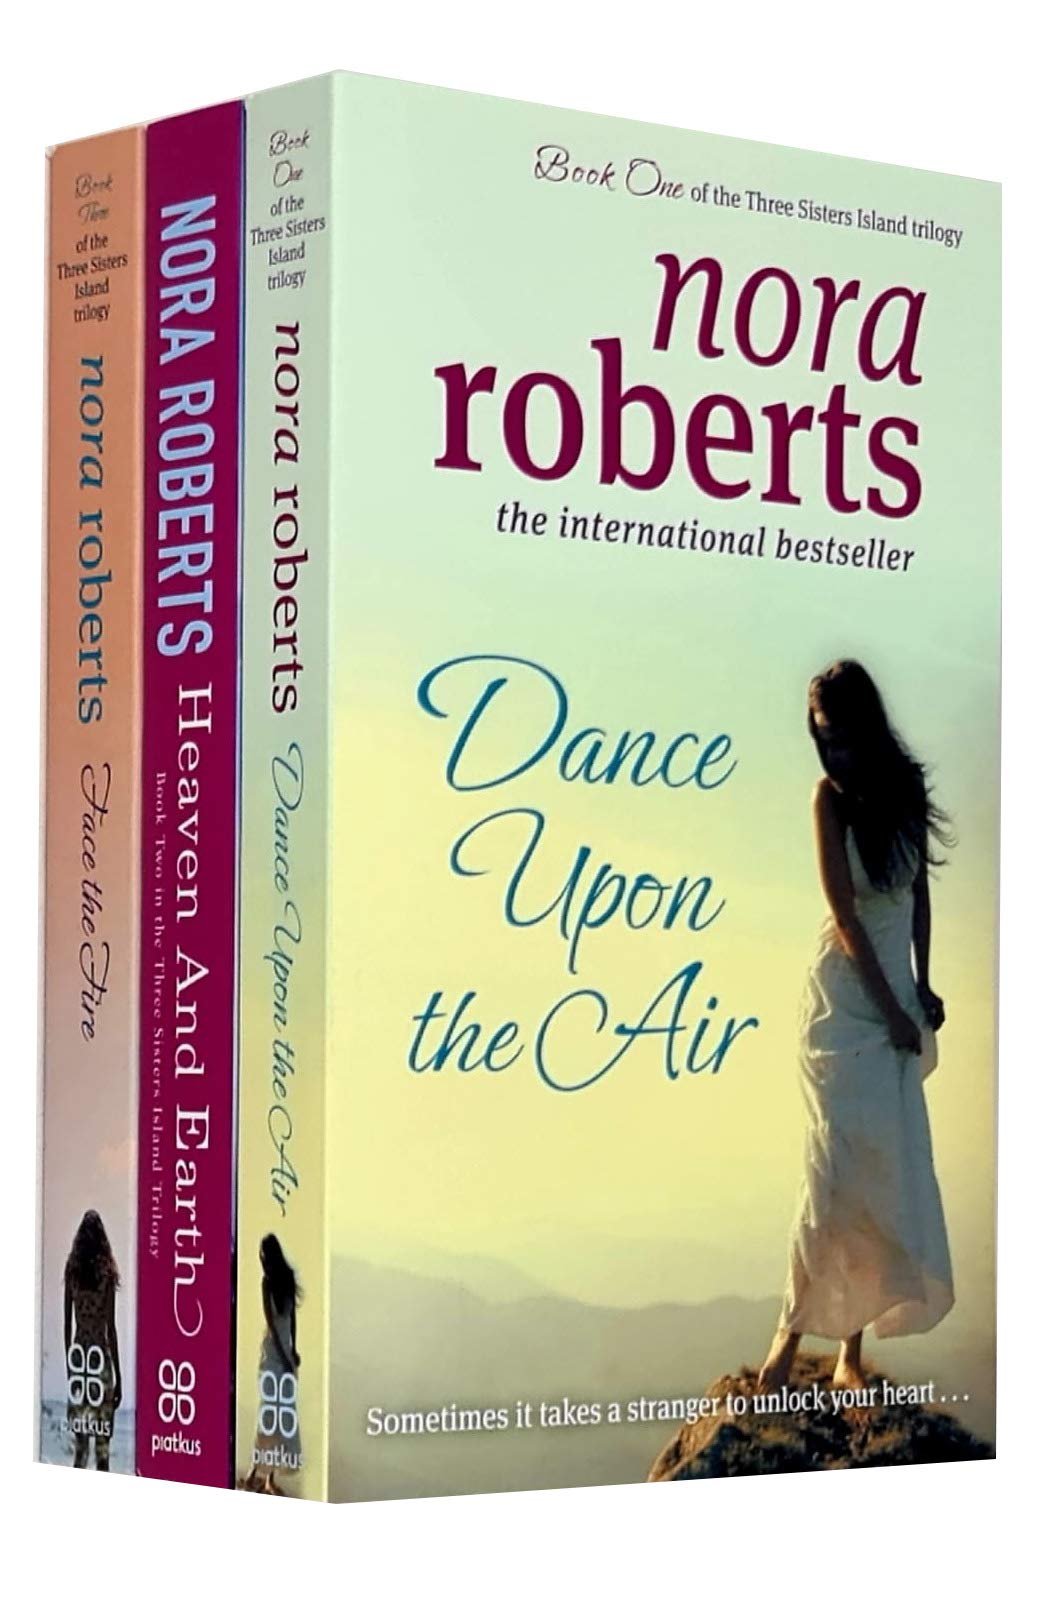 Three Sisters Island Trilogy Collection 3 Books Set By Nora Roberts - Fiction - Paperback - St Stephens Books